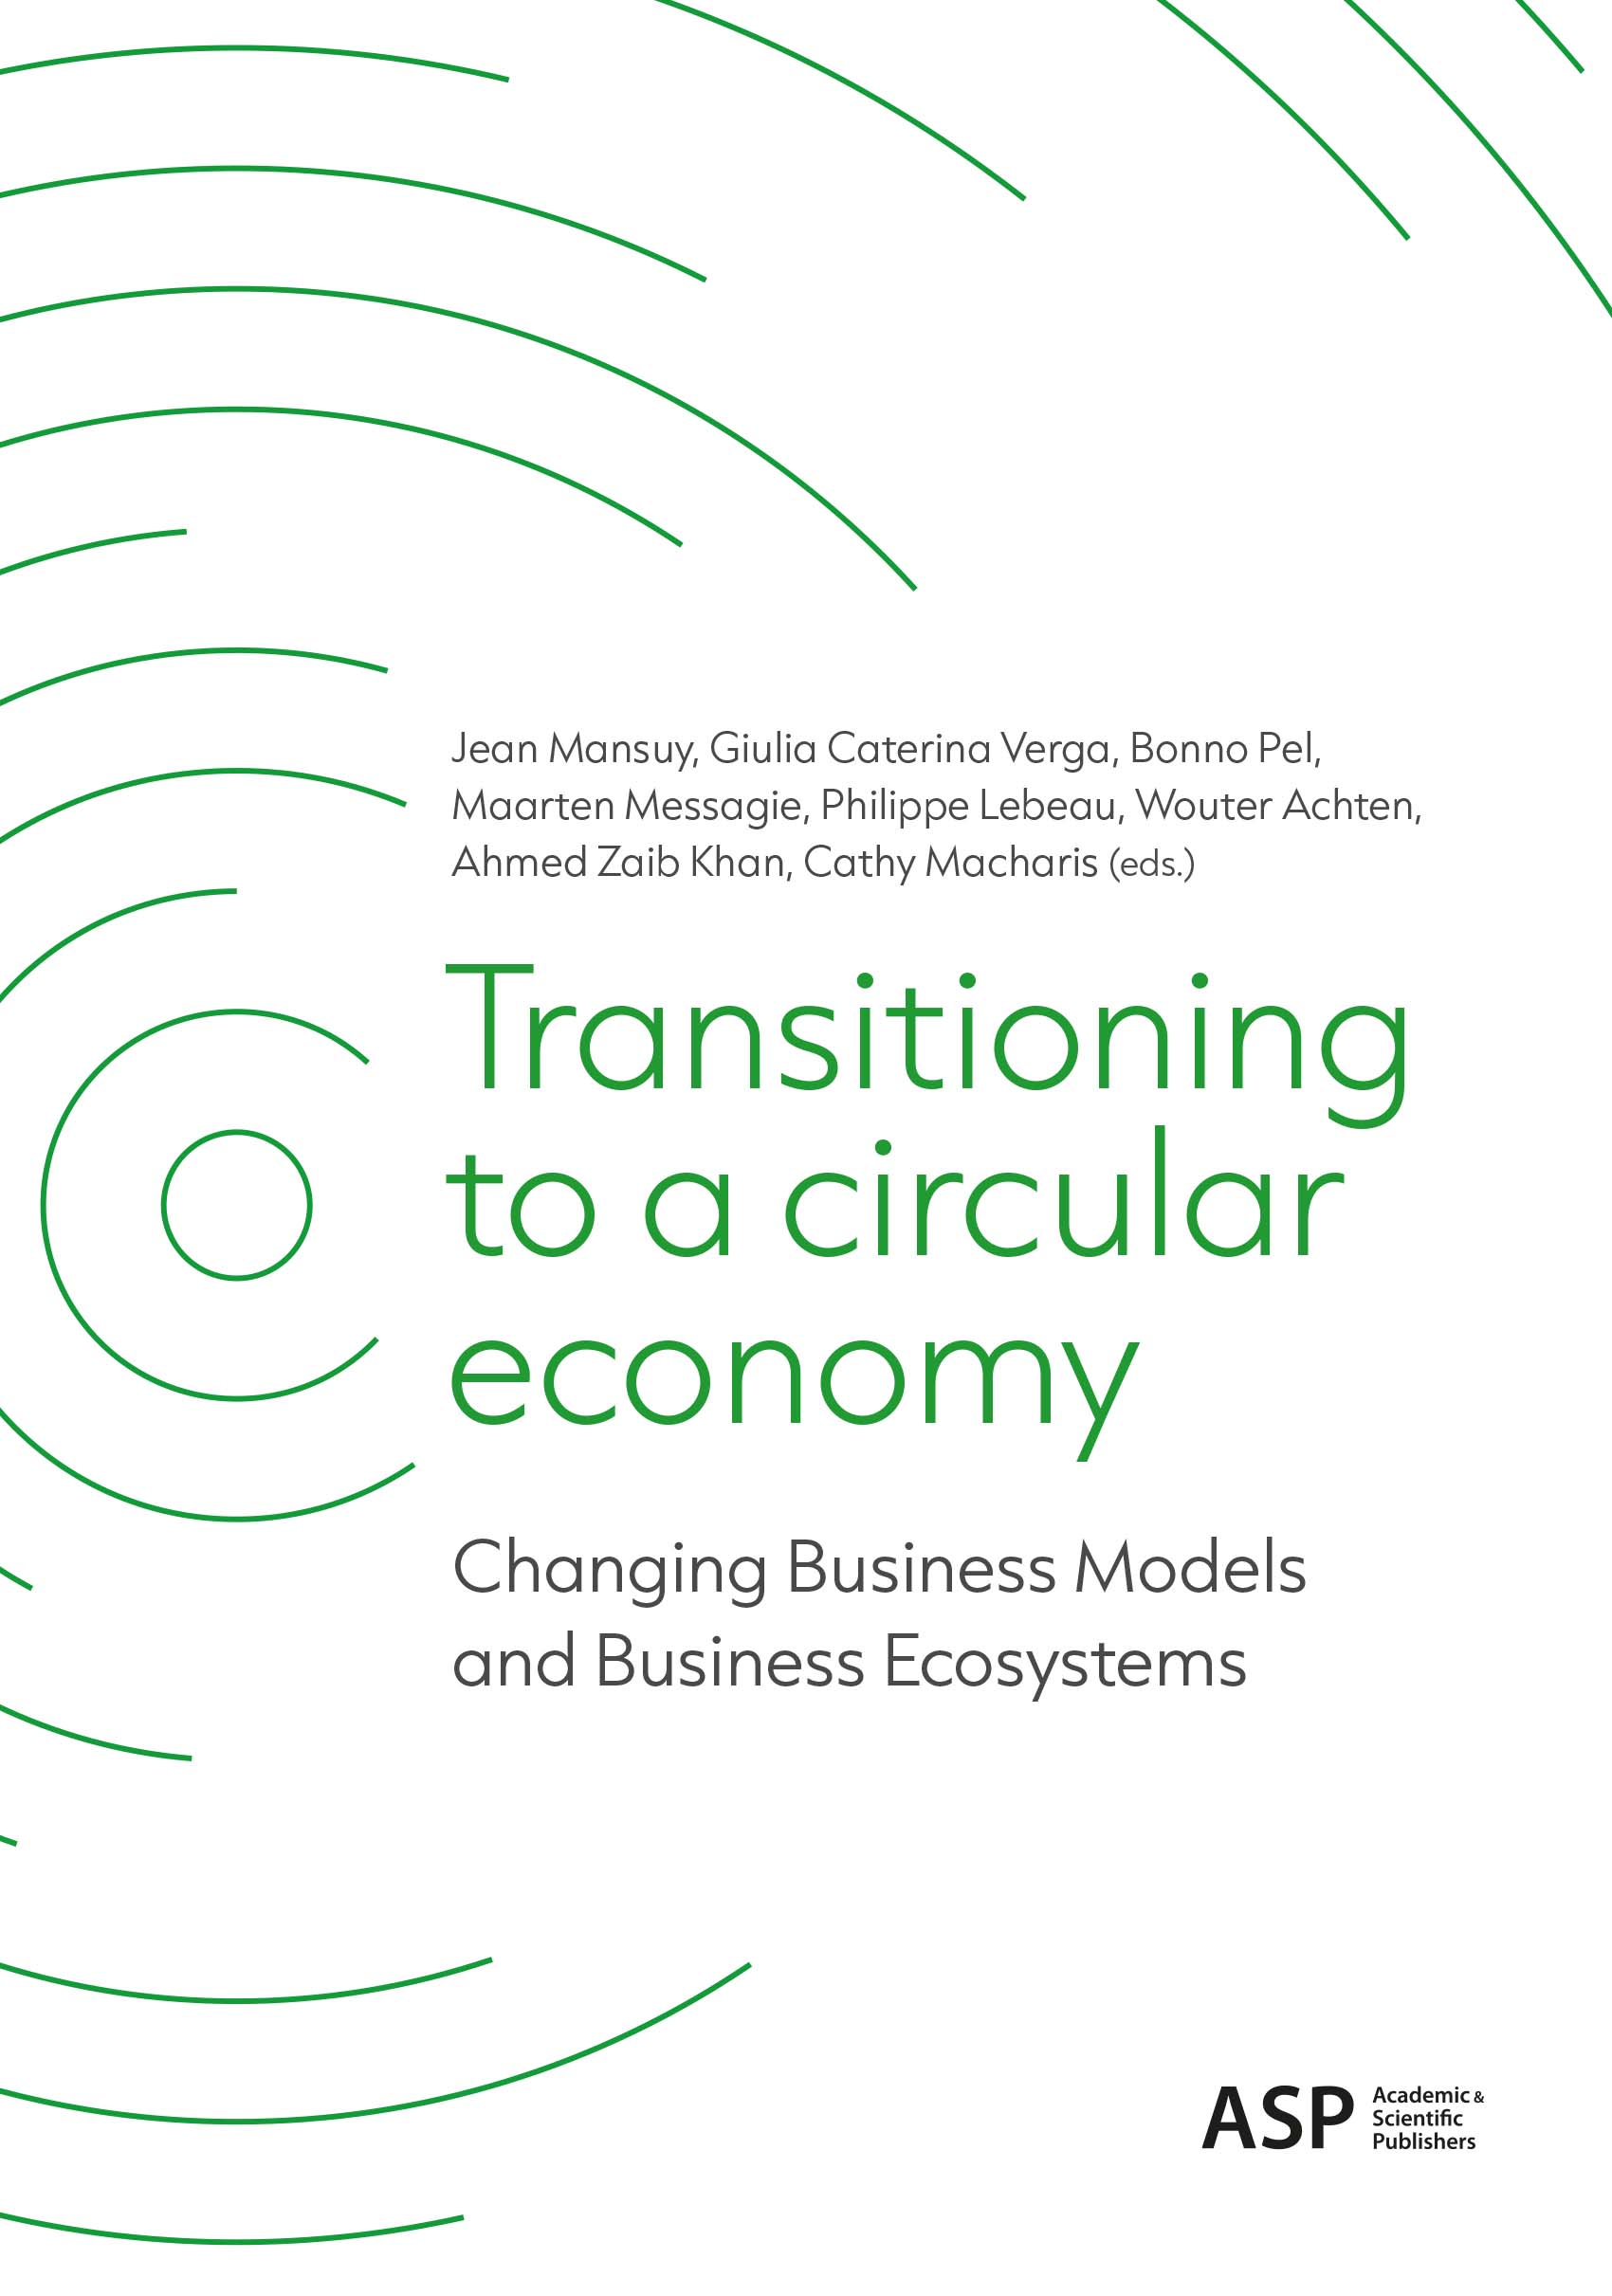 TRANSITIONING TO A CIRCULAR ECONOMY